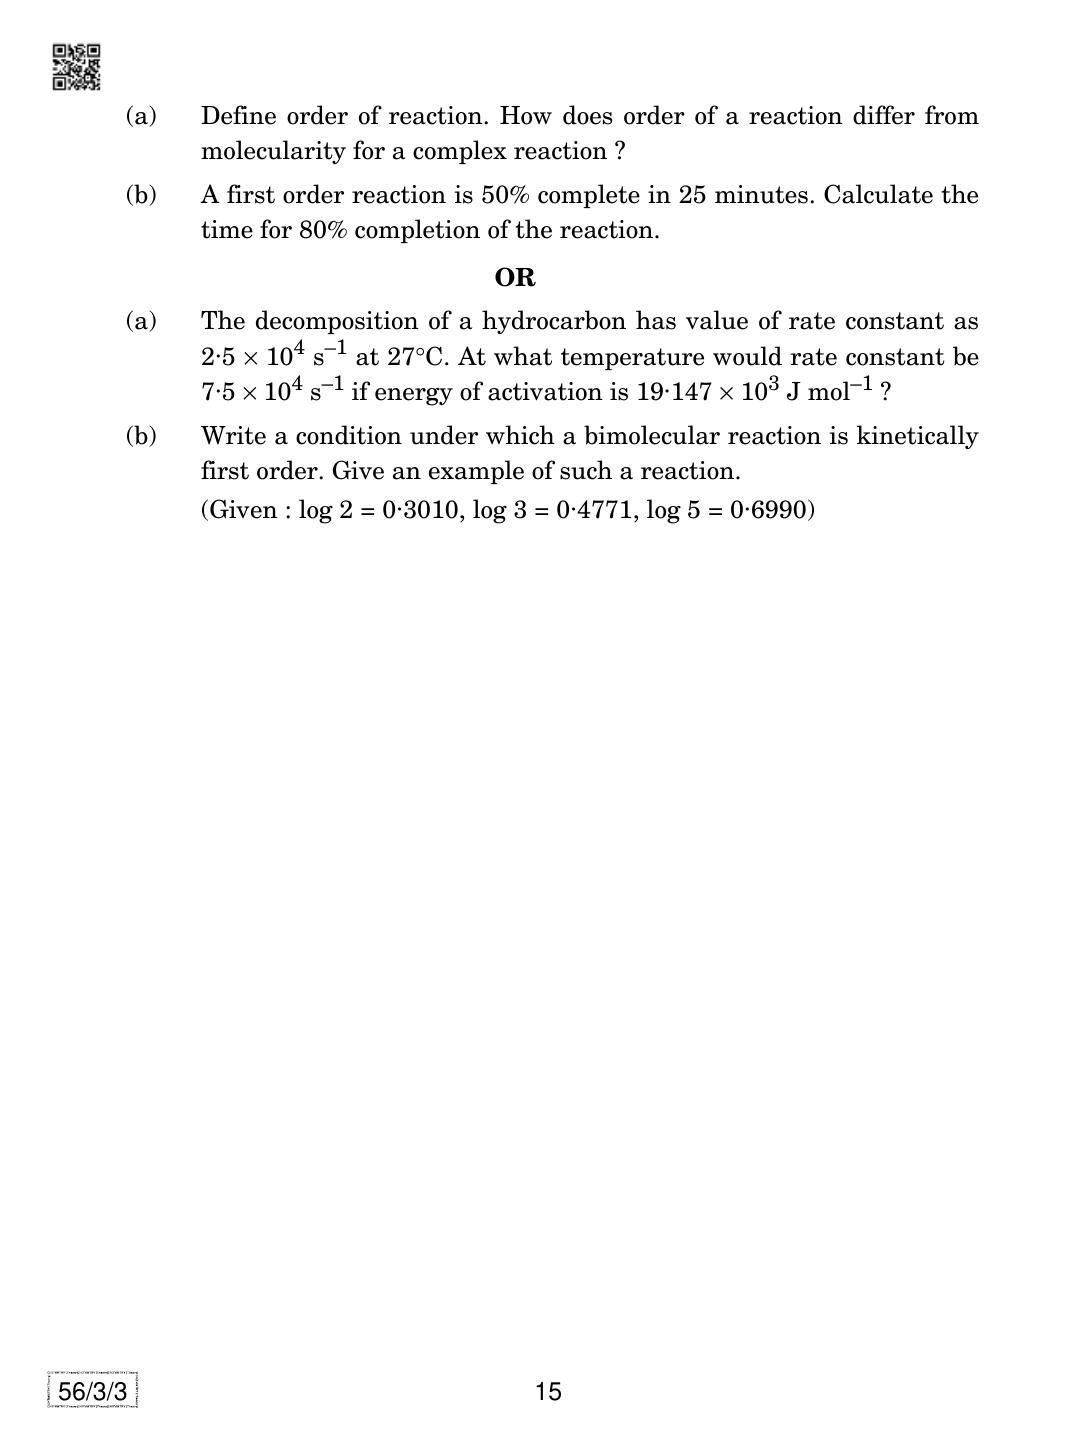 CBSE Class 12 56-3-3 Chemistry 2019 Question Paper - Page 15